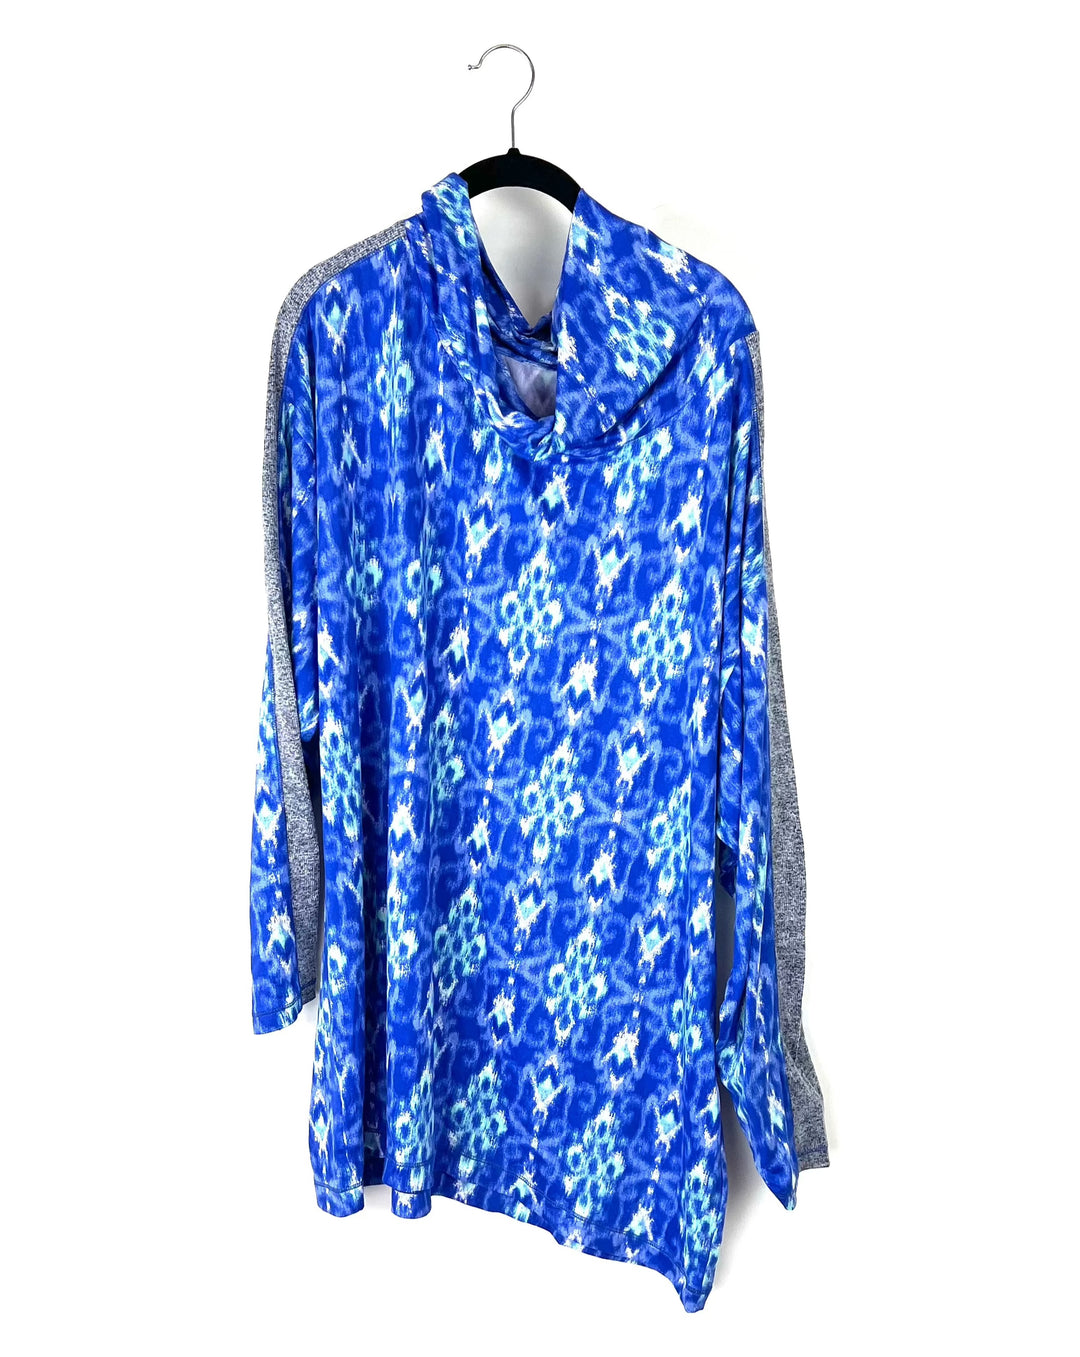 Blue and Grey Printed Turtle Neck Long Sleeved Top - 1x